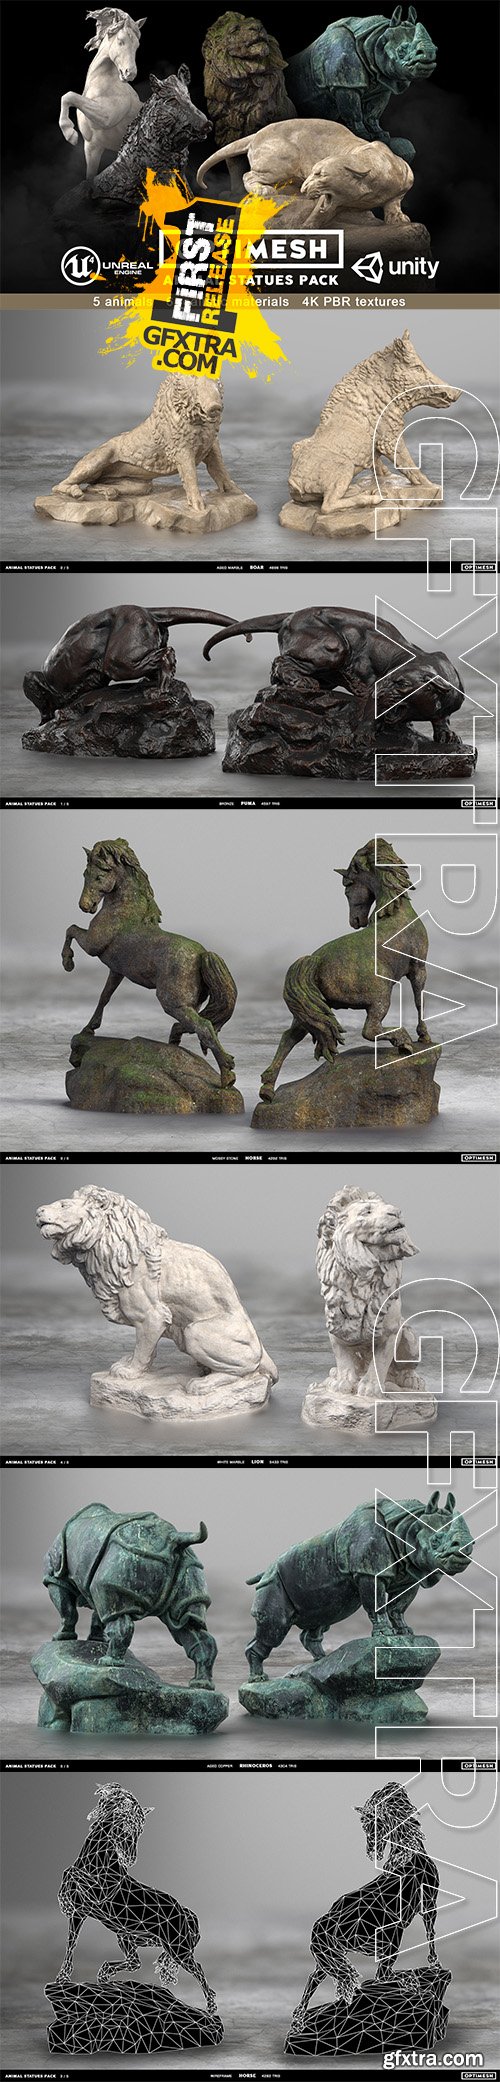 Cgtrader - Animal Statues 3D PBR Pack lion puma rhino boar horse Low-poly 3D model